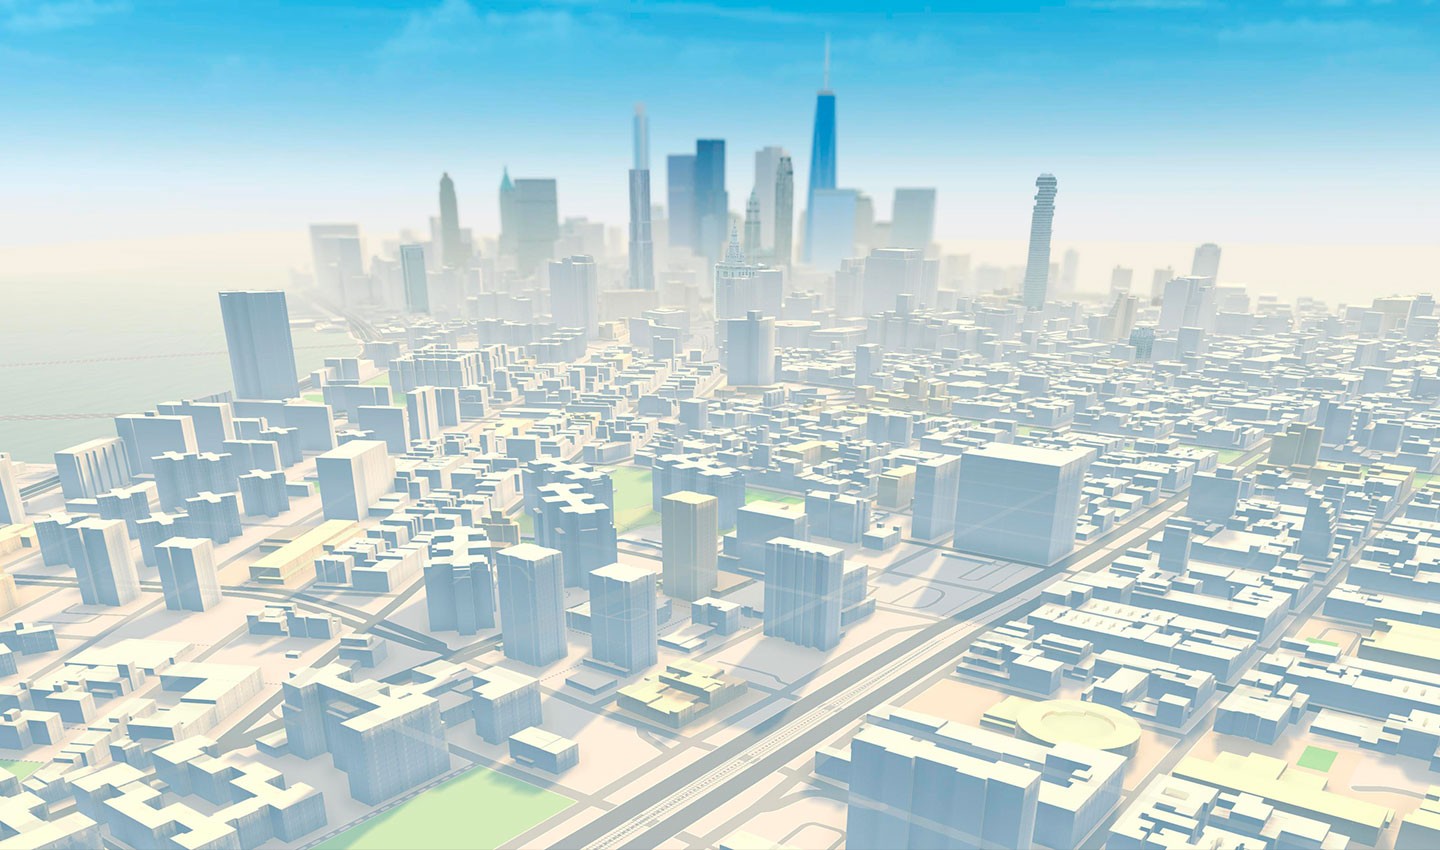 City landscape on TomTom Orbis Maps with fog rolling in